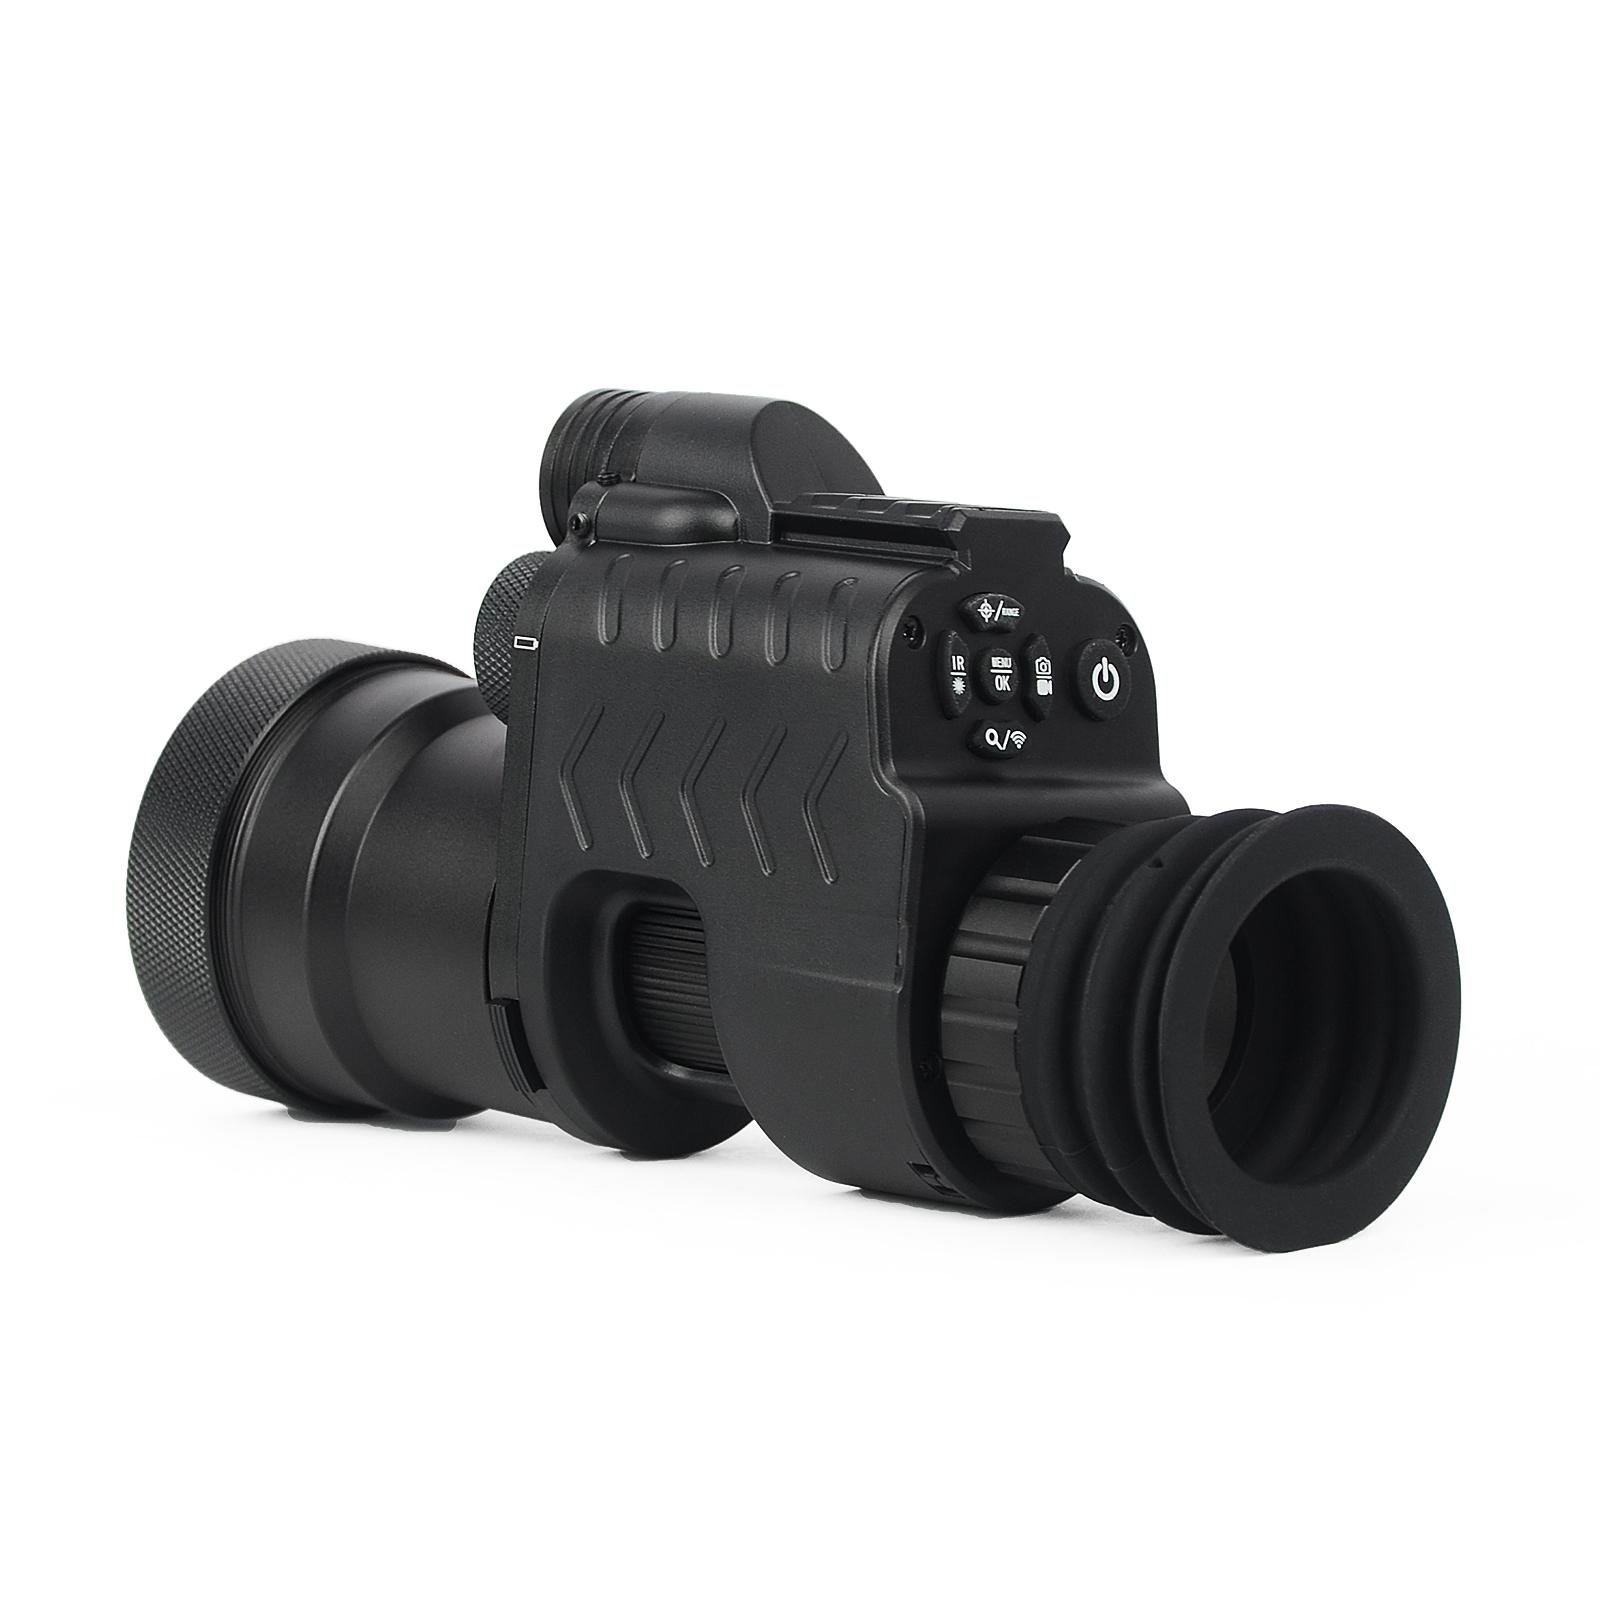 MARCH NV310 Infrared Hunting Night vision scope optic Wifi Camera Night vision 3